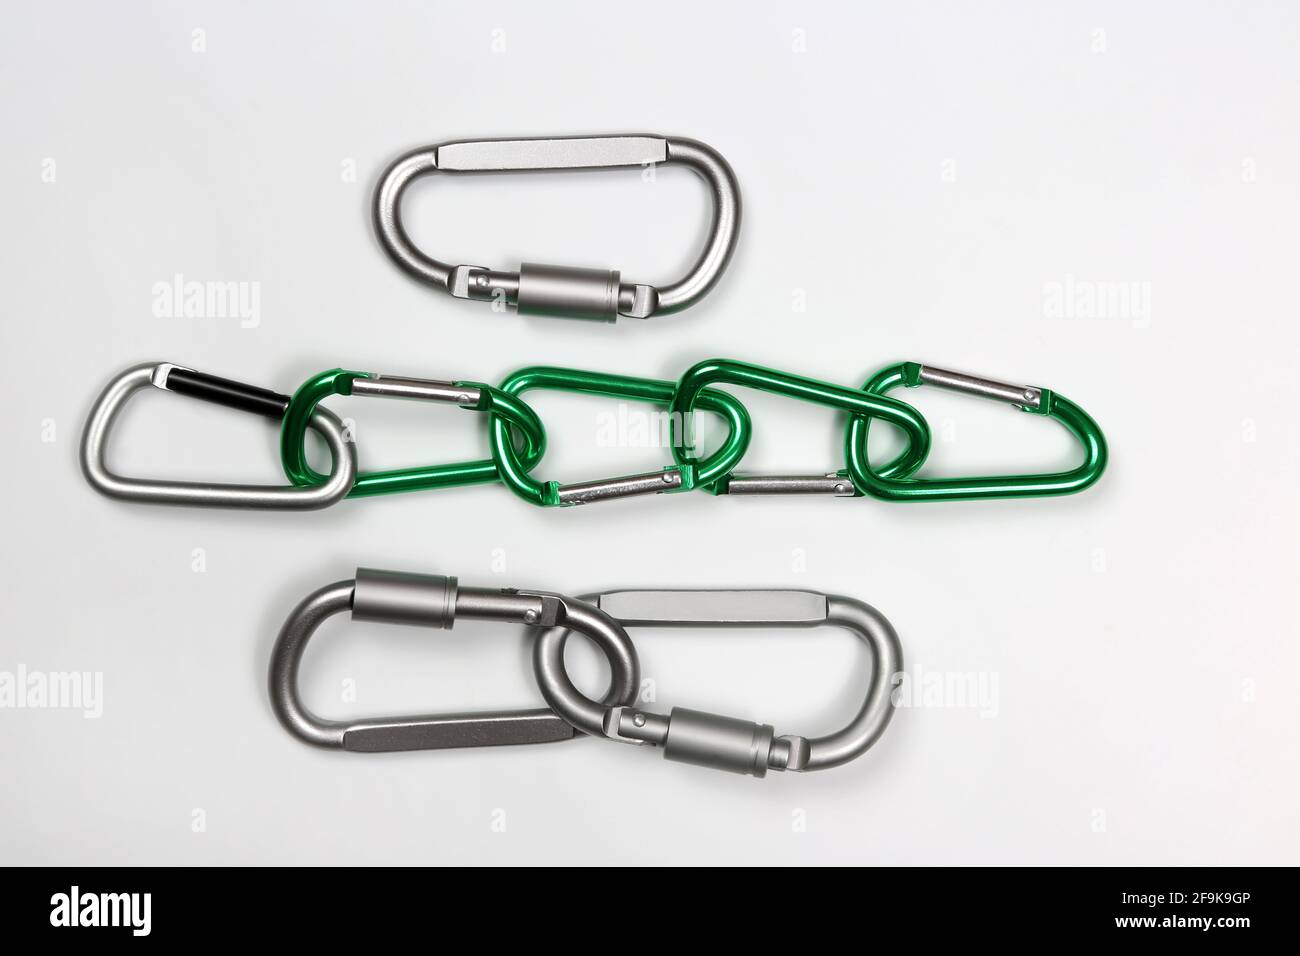 much bonded to each other aluminum carabiners Stock Photo